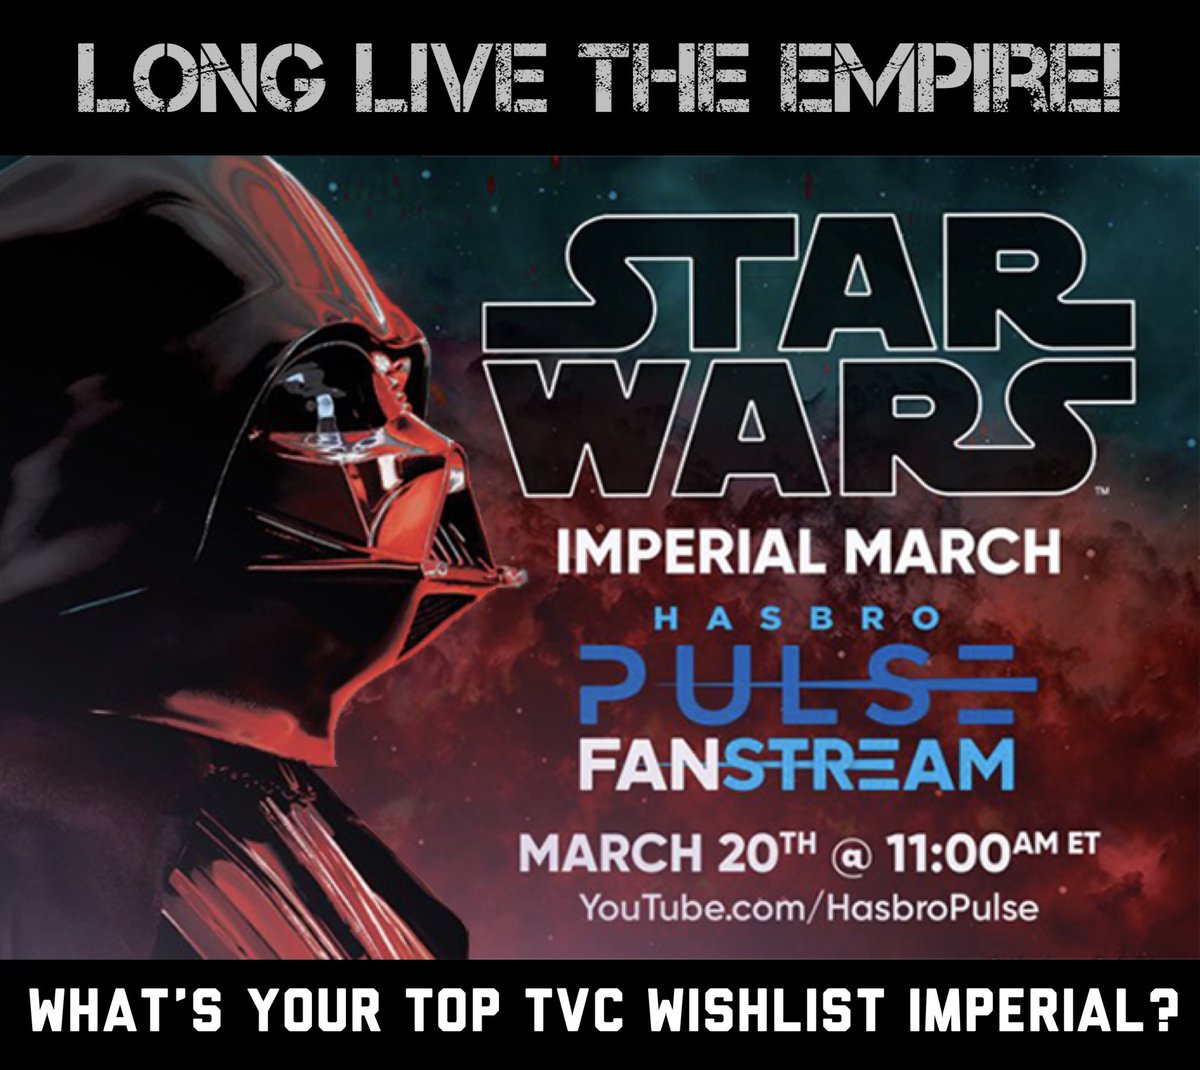 #StarWars #TVC #TheEmpire #DarthVader #Toys #Livestream #Hasbro #HasbroPulse #Kenner #Toys4Life #BackTVC #Save375 #FightForTVC #TheVintageCollection #StarWarsFan #ACTIONFIGURES #Collectibles #ImperialMarch #GalacticEmpire 

Can’t wait for this!